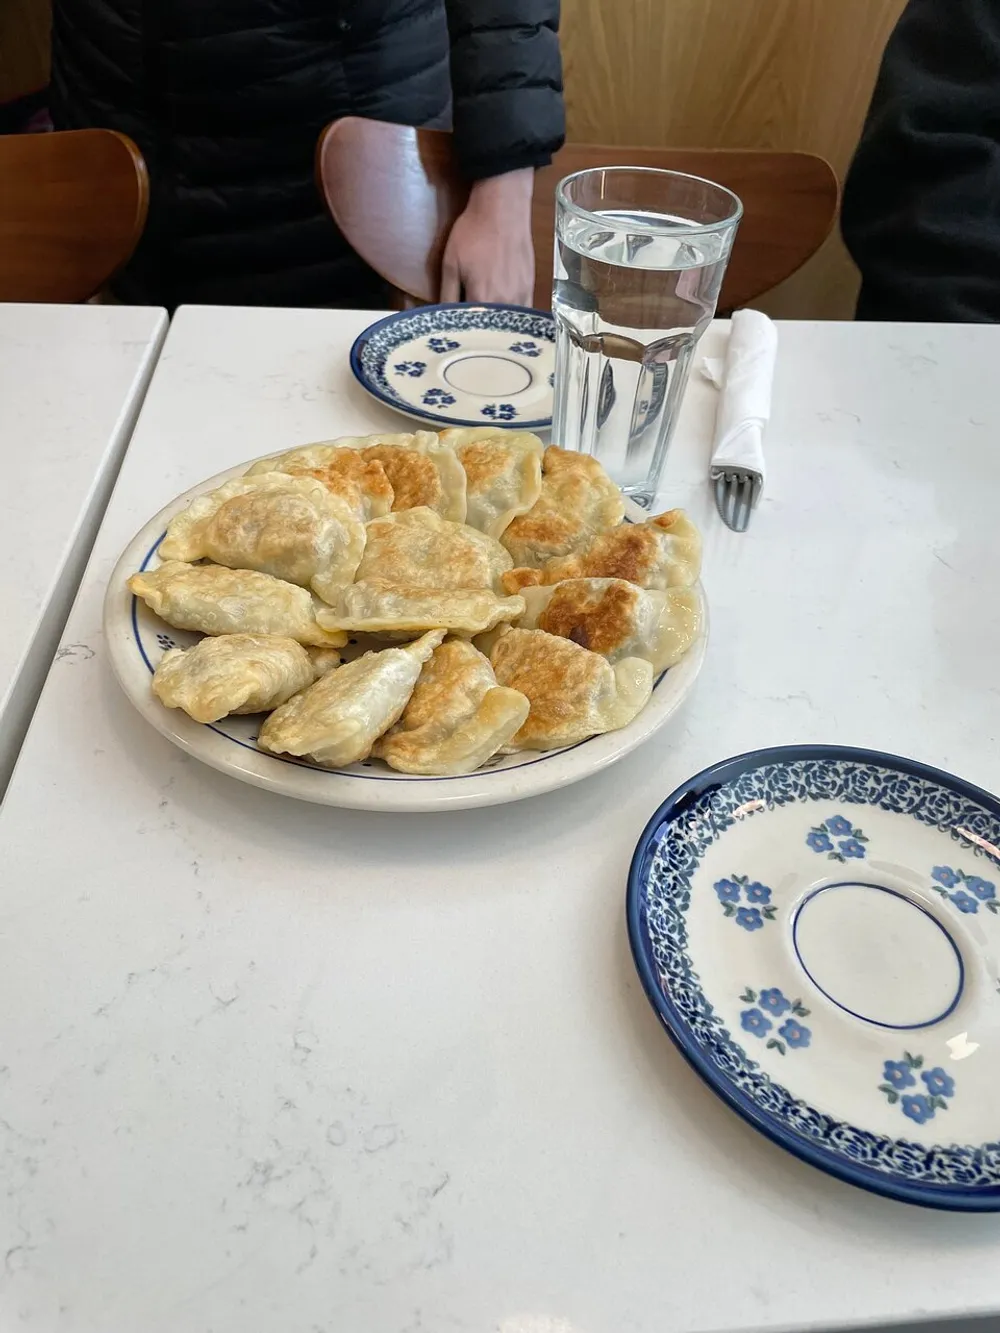 A plate of golden-brown dumplings is served on a table in a casual dining setting accompanied by a glass of water and decorative empty plates with a person seated across the table